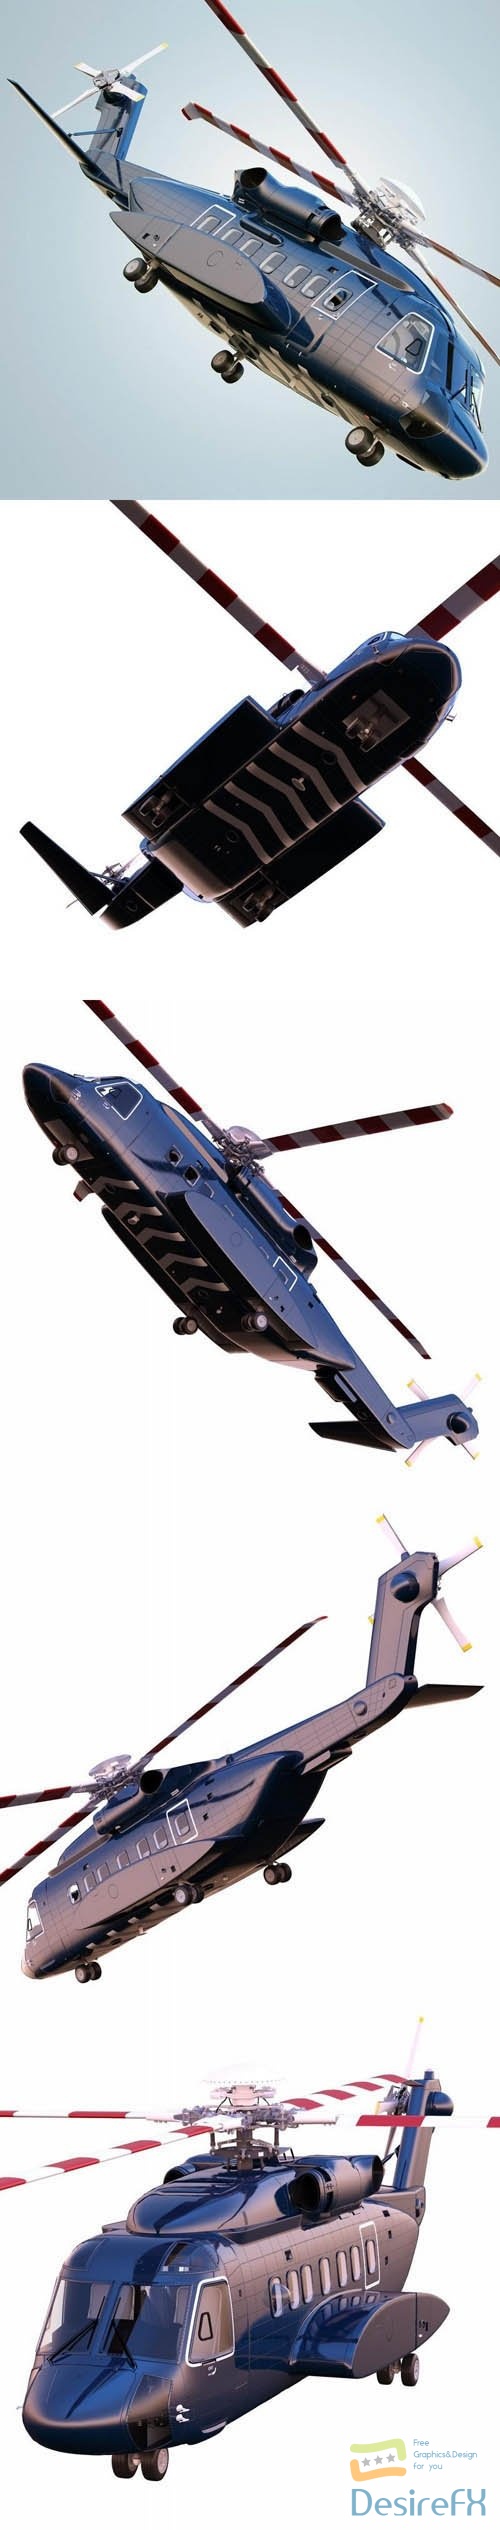 Realistic and fully detailed model of Sikorsky S-92 H-92